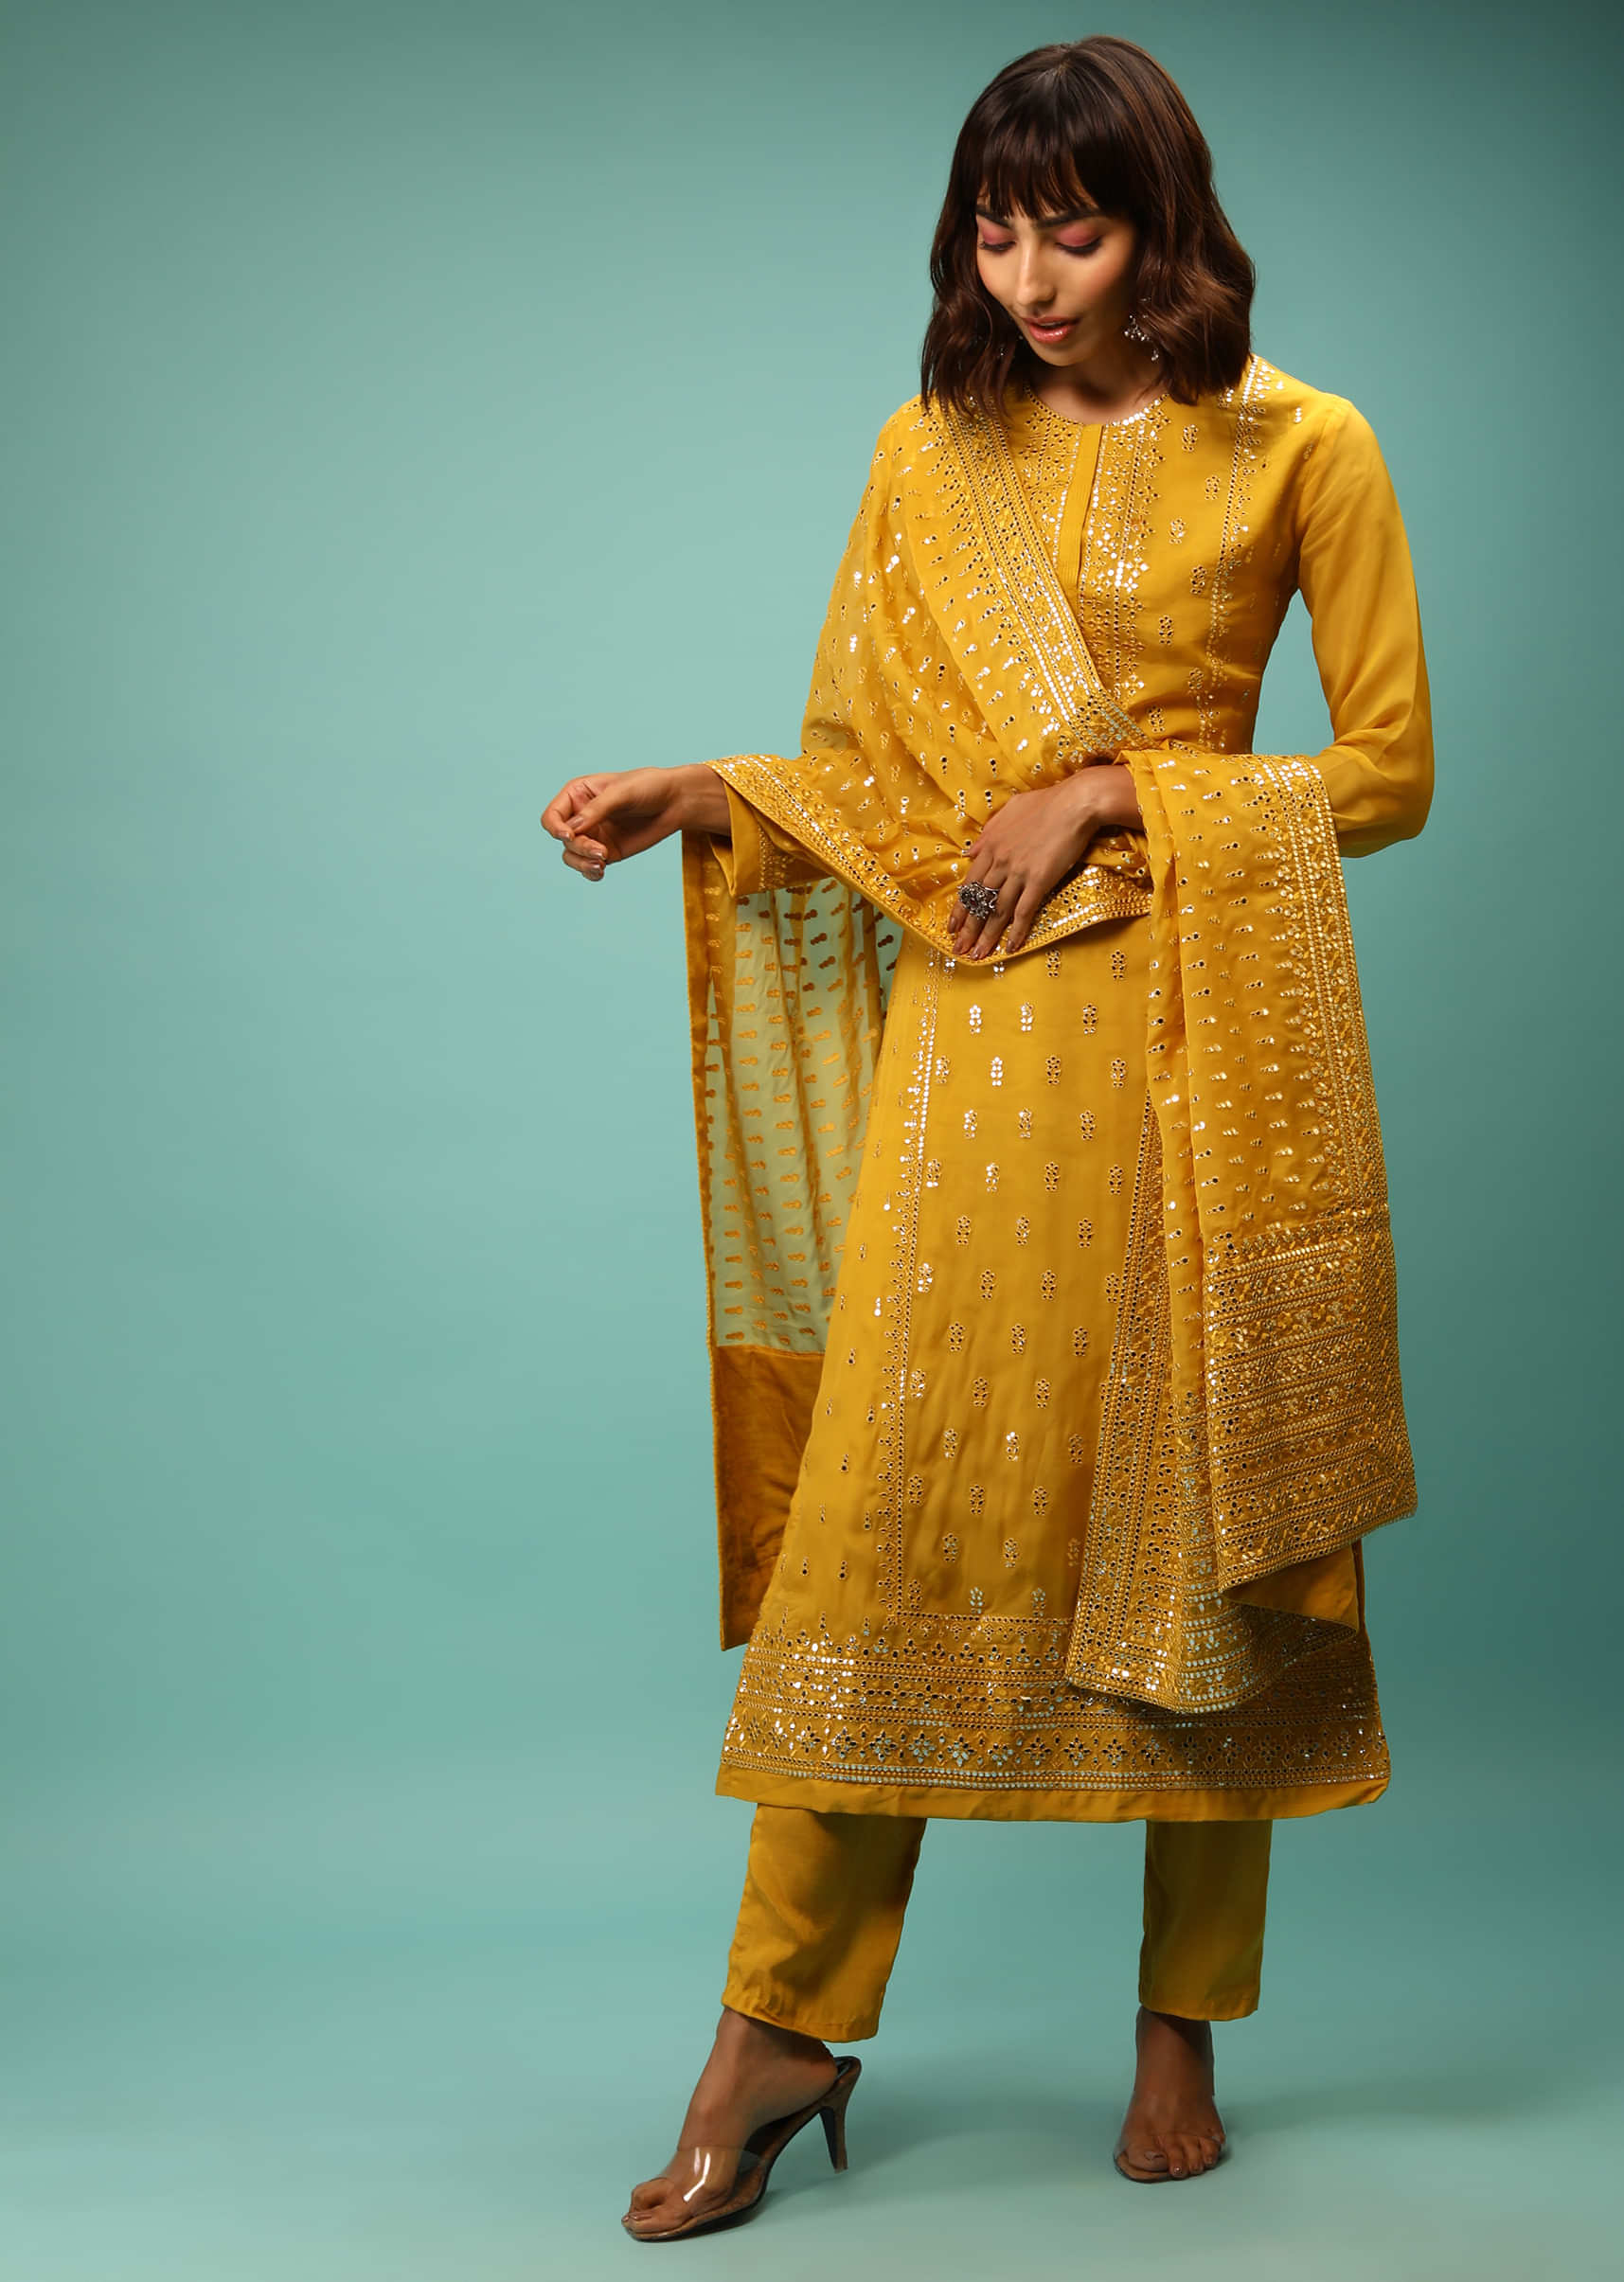 Sulphur Yellow Straight Cut Suit With Full Sleeves And Mirror Embroidered Floral Buttis 